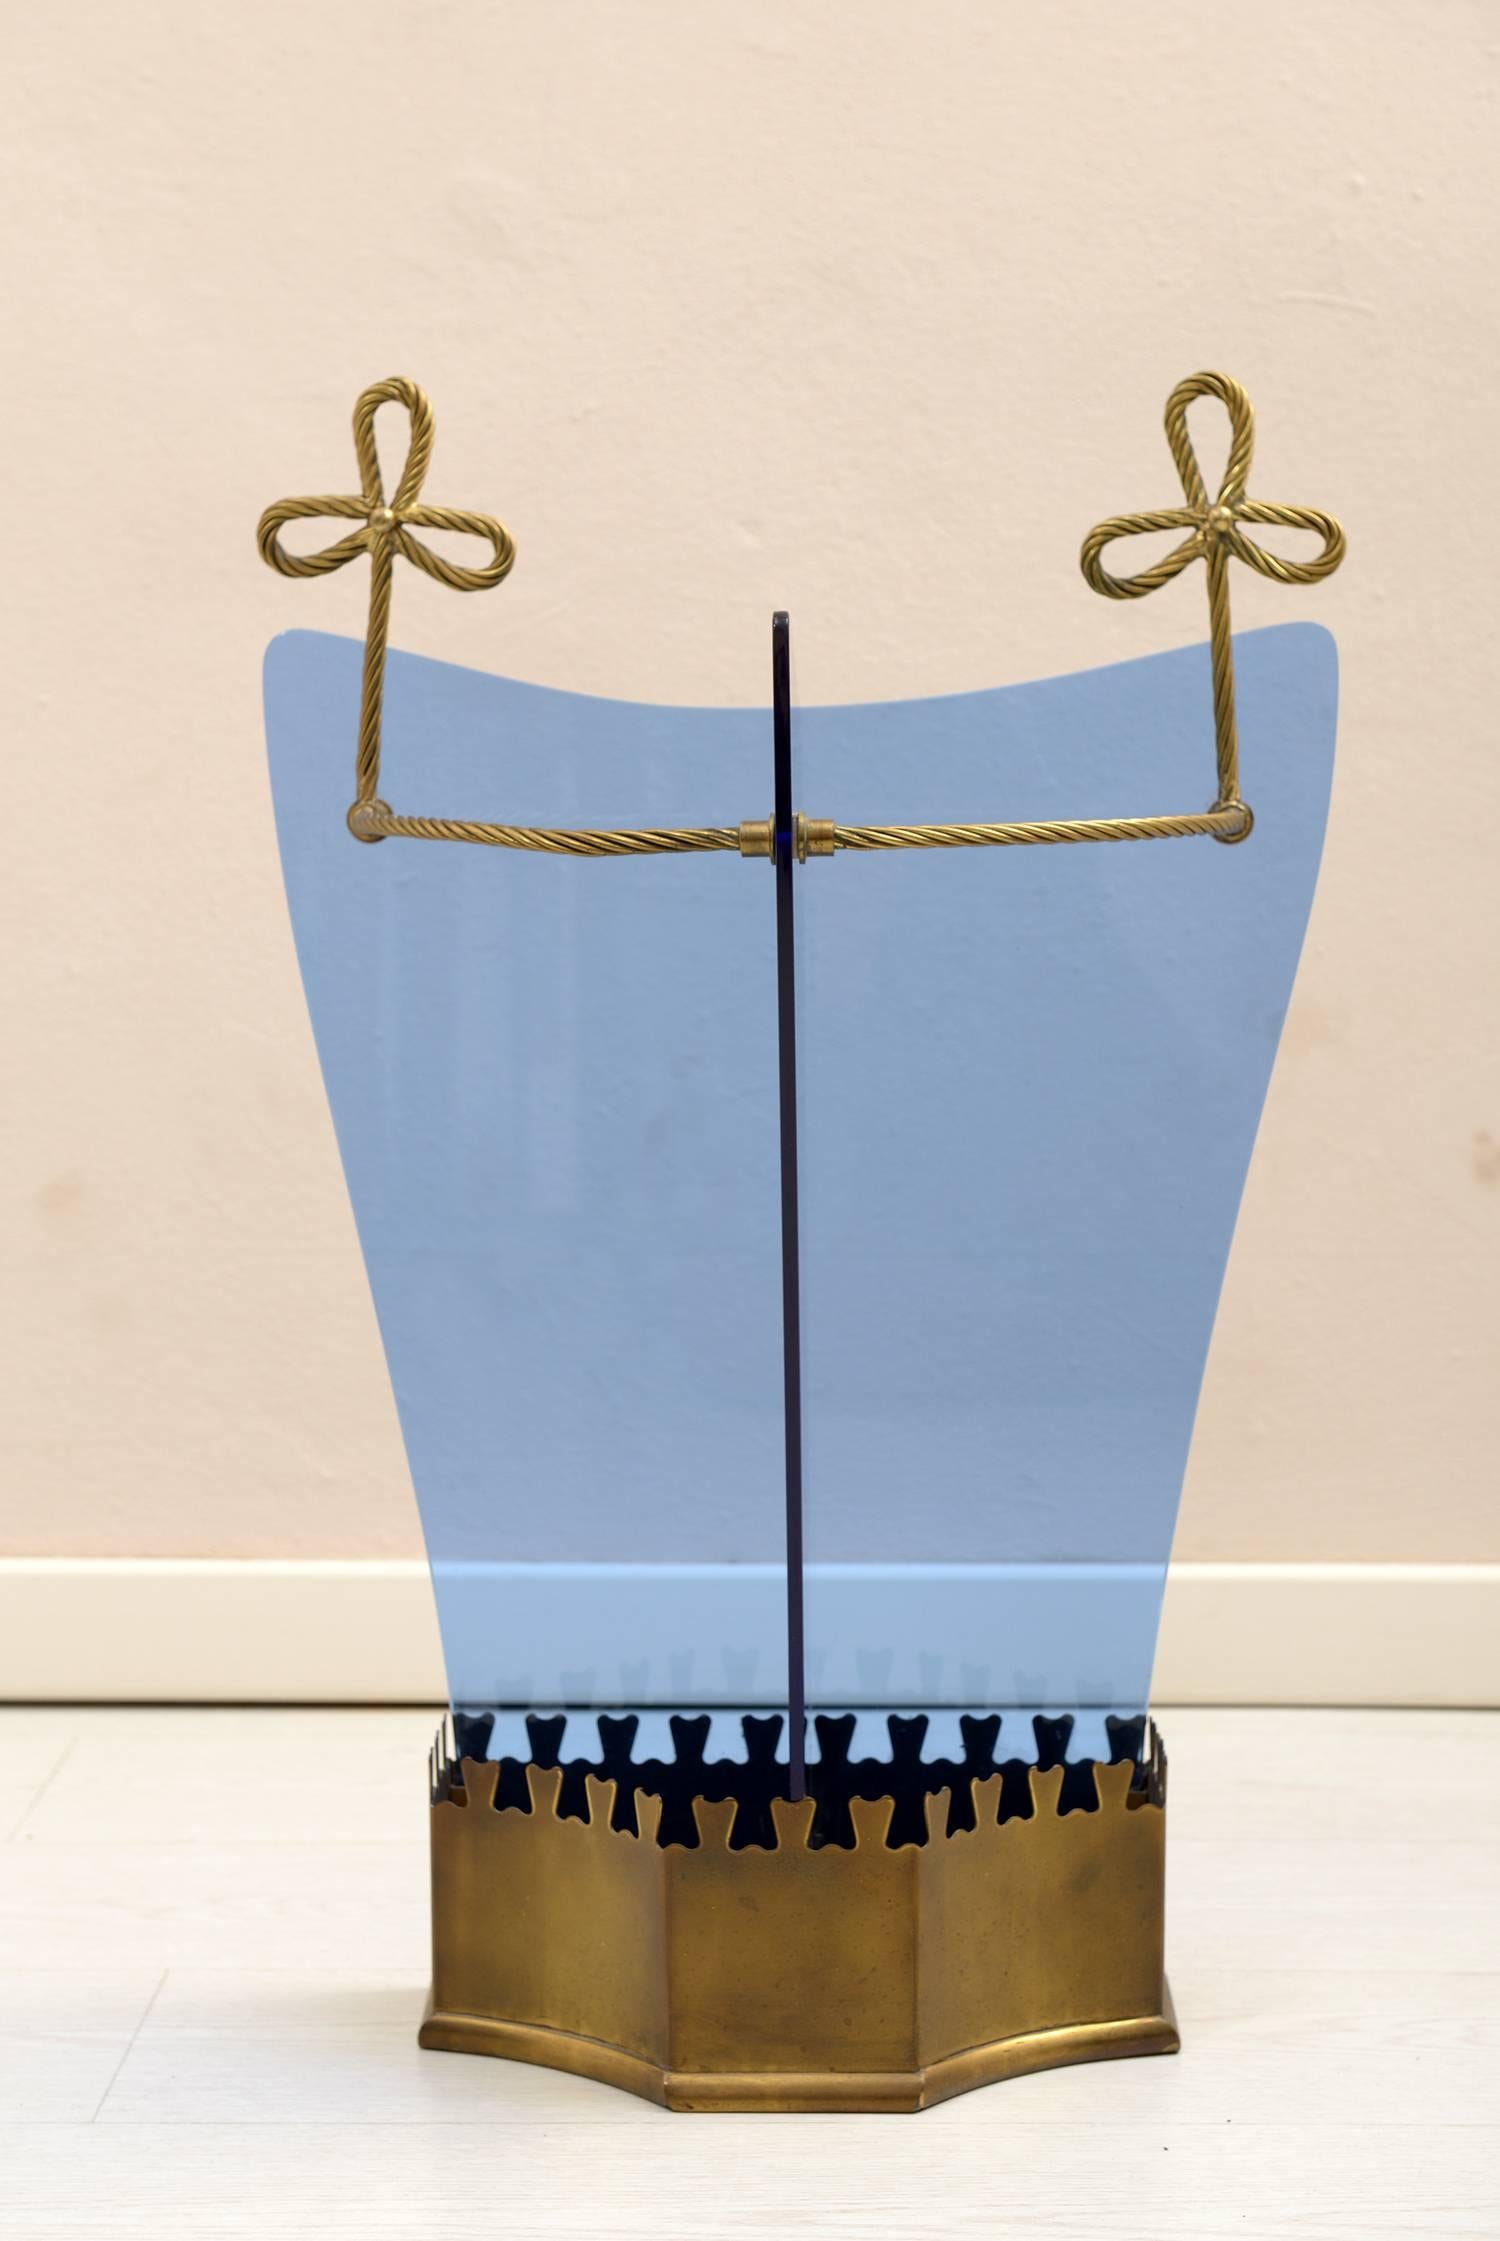 Brass moulded structure with two brass trays containers to empty the water.
Cut and beveled bleu Tempered crystal.
Manufacture crystal Art Torino, Italy, 1950.